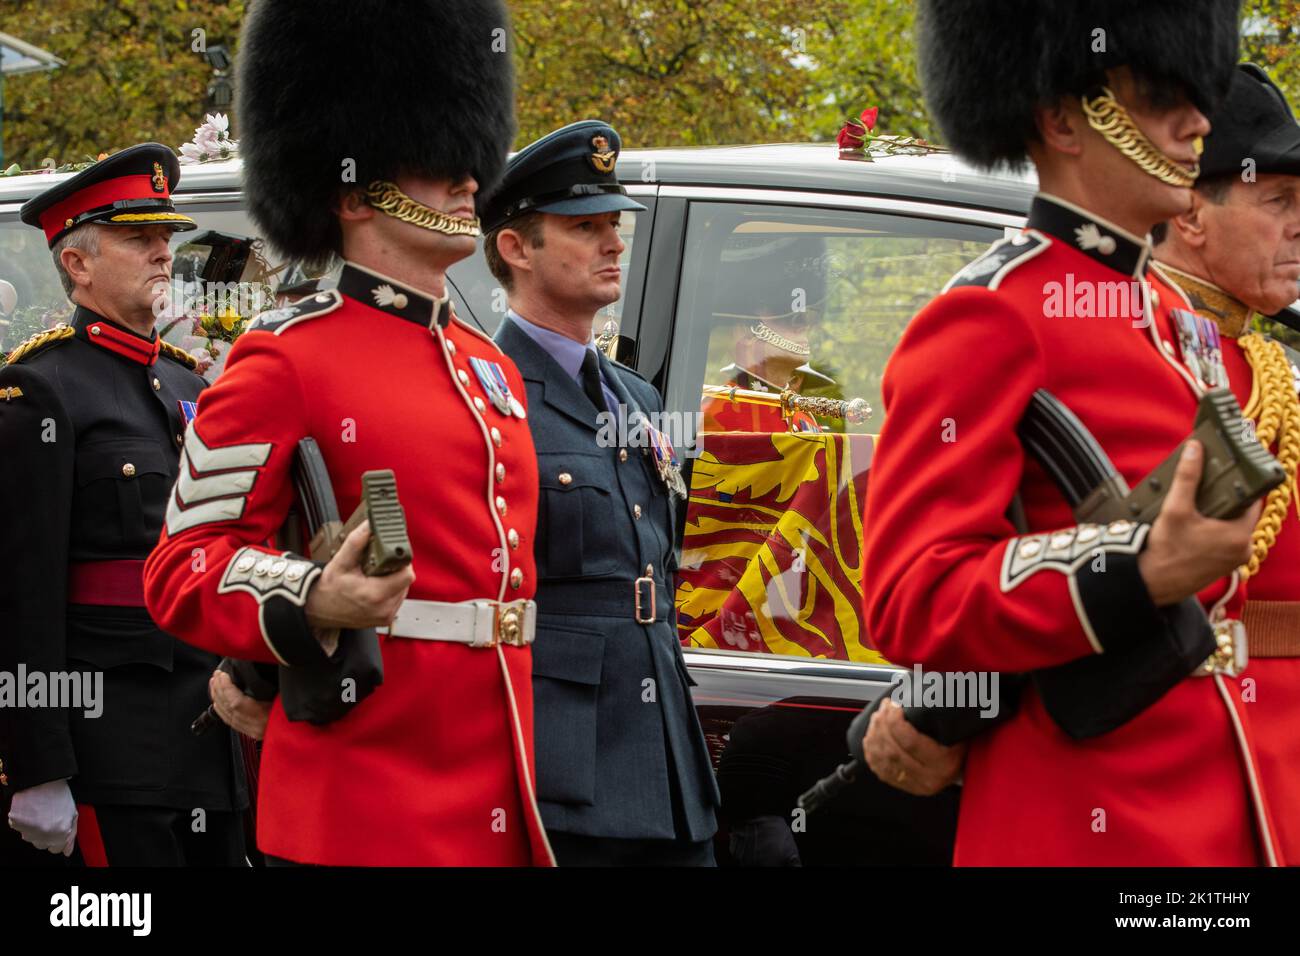 Windsor, UK. 19th September, 2022. Grenadier Guards and other military personnel escort Queen Elizabeth II's coffin lying in the State Hearse on the Long Walk in Windsor Great Park during a procession from Shaw Farm Gate to St George’s Chapel for the Committal Service. Queen Elizabeth II, the UK's longest-serving monarch, died at Balmoral aged 96 on 8th September 2022 after a reign lasting 70 years. Credit: Mark Kerrison/Alamy Live News Stock Photo